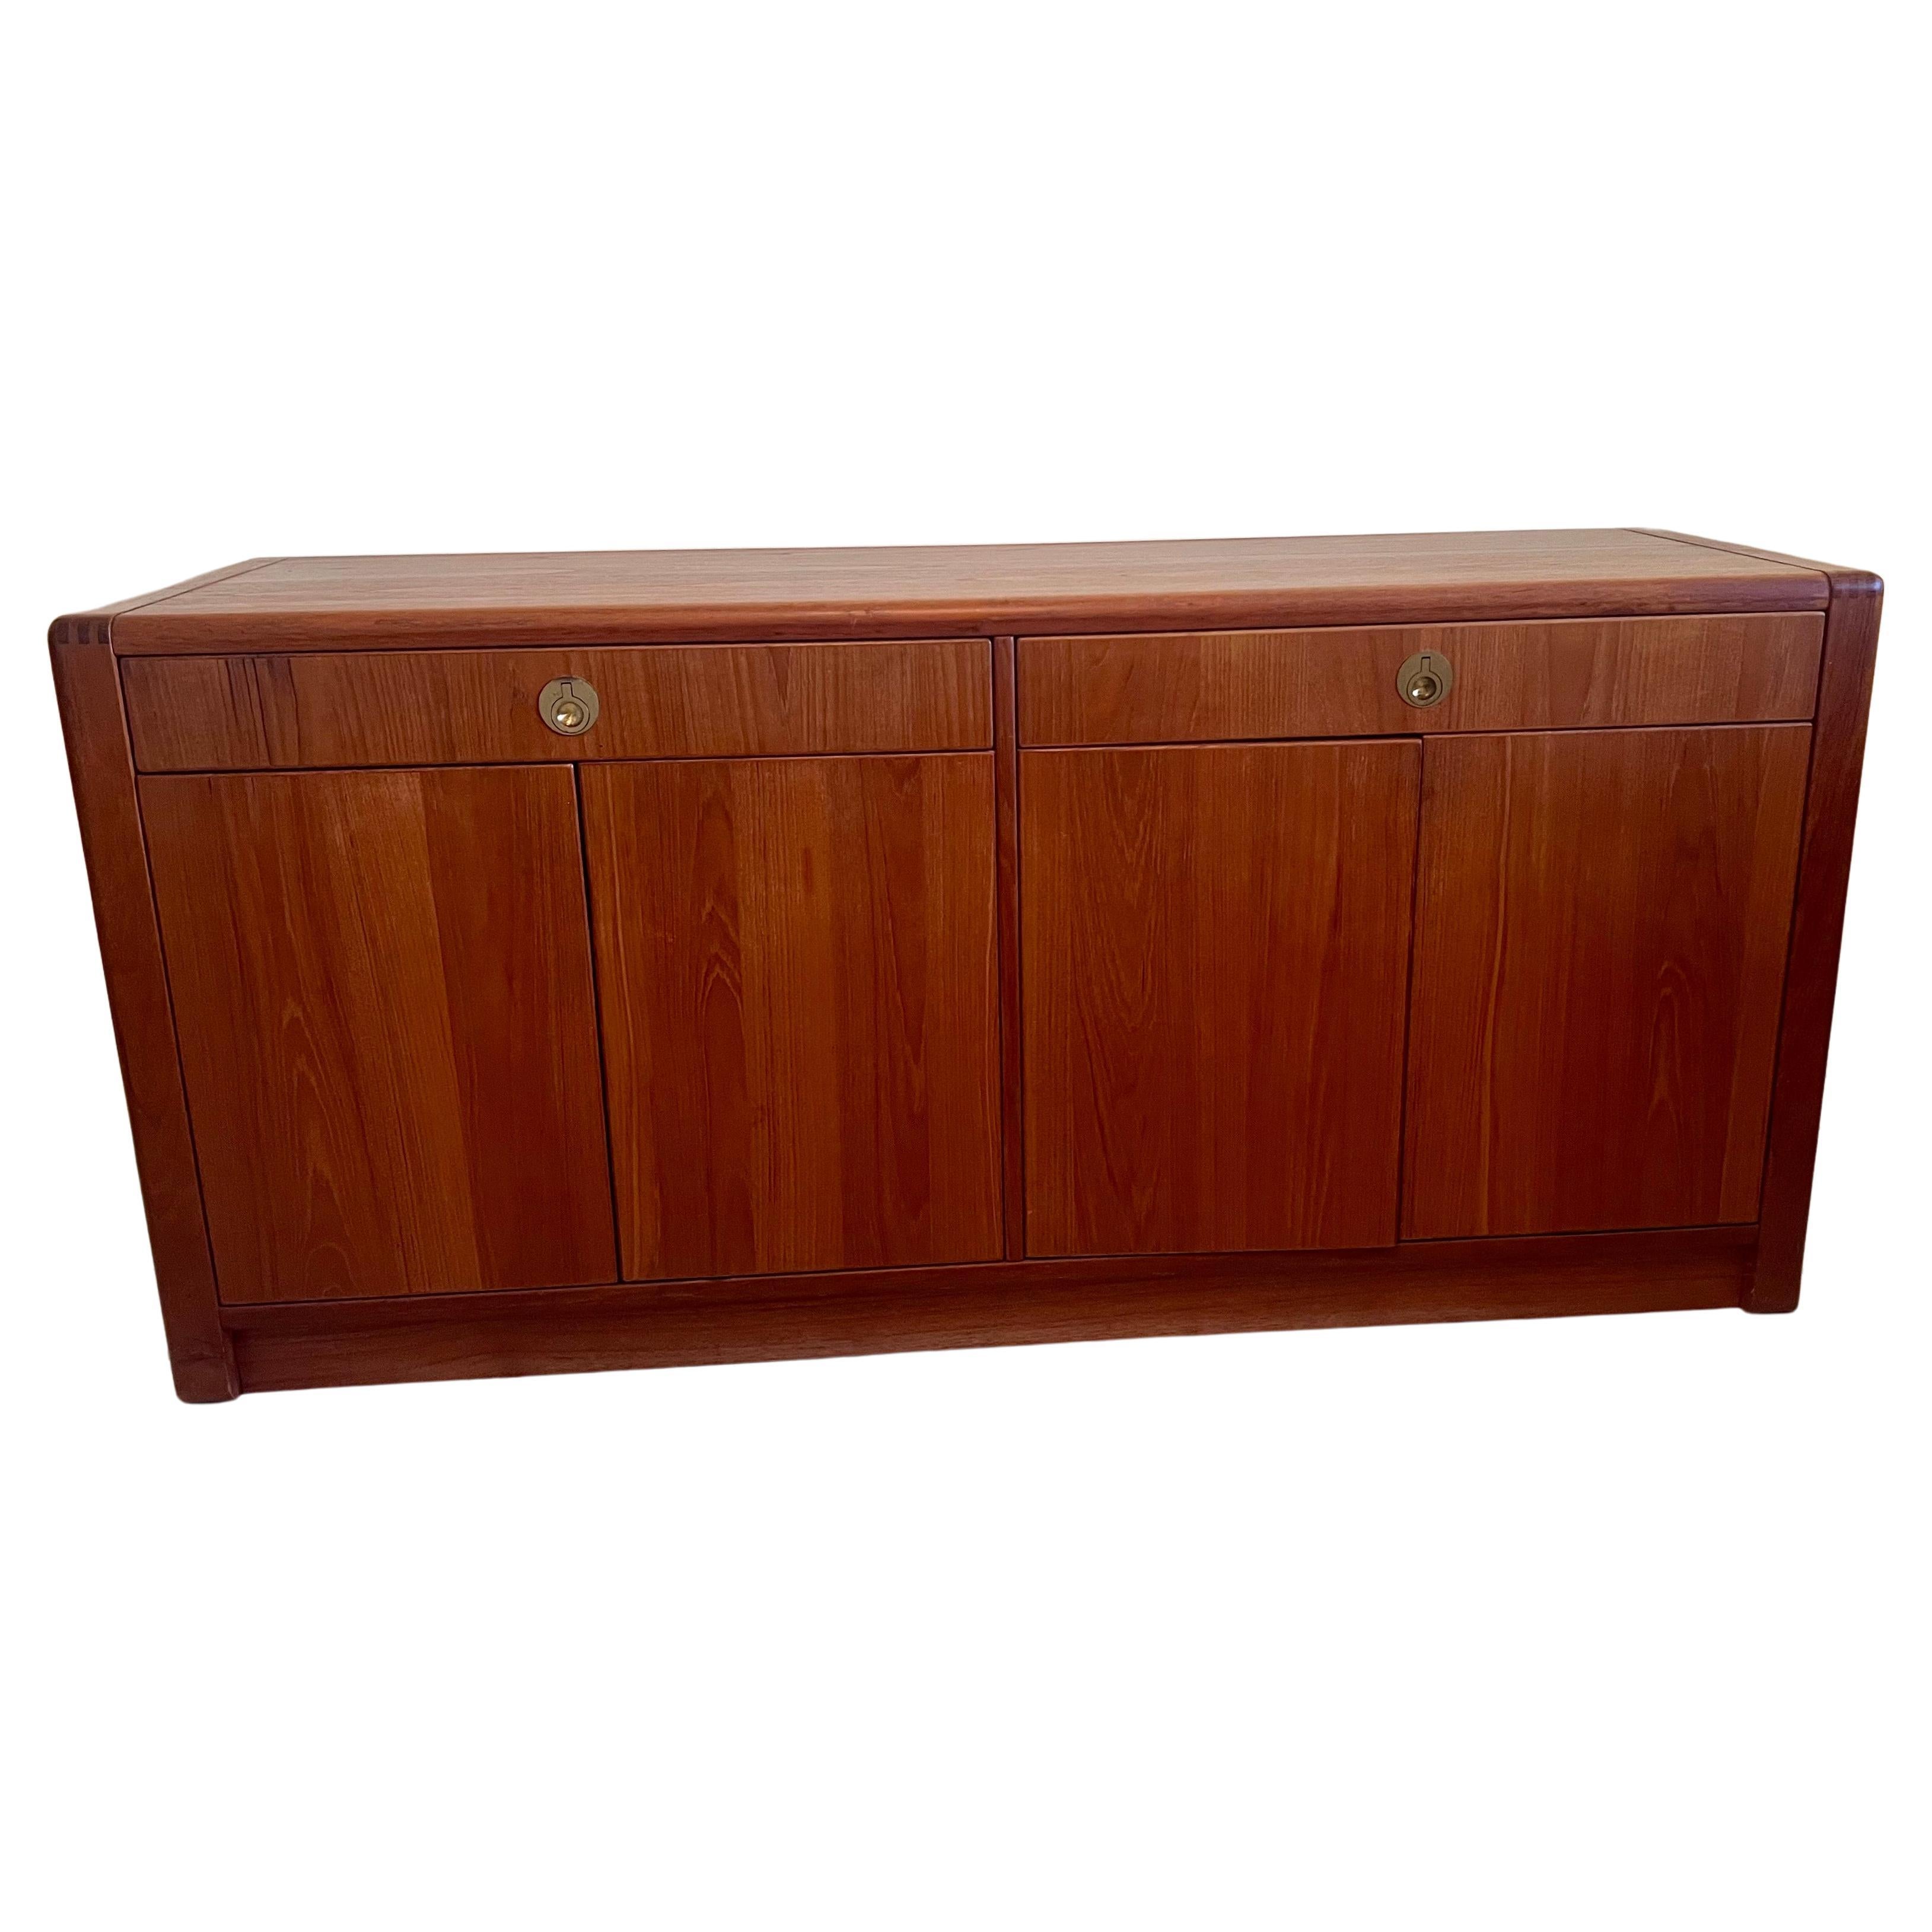 A beautiful Danish modern Teak credenza , circa 1980's beautiful detail rounded corners construction , double drawer with beautiful solid brass flat handles nice condition lots of storage beautiful dark teak.